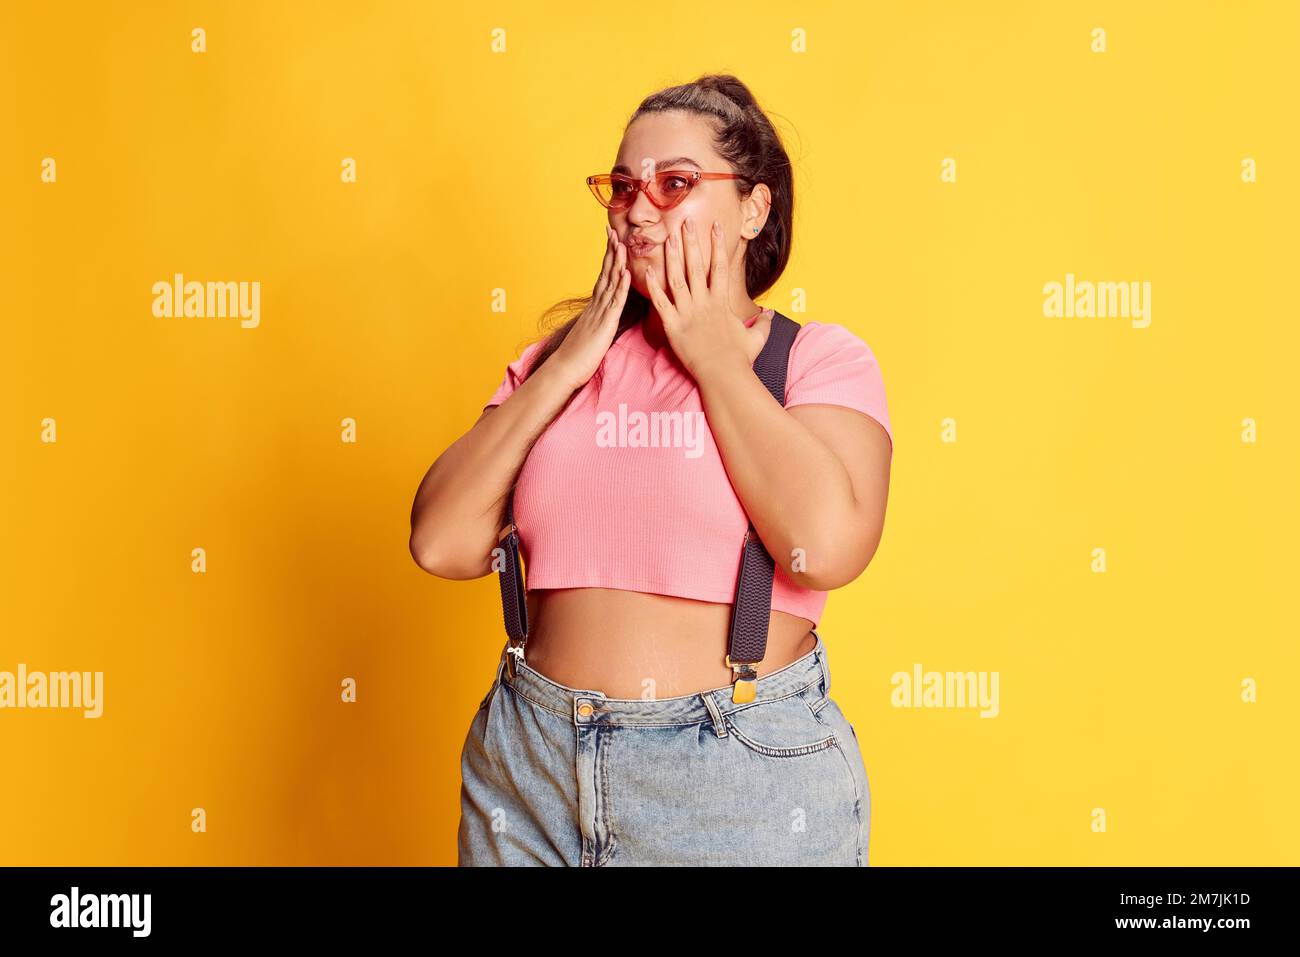 Portrait of young overweight woman in casual bright clothes posing over vivid yellow studio background. Beauty Stock Photo